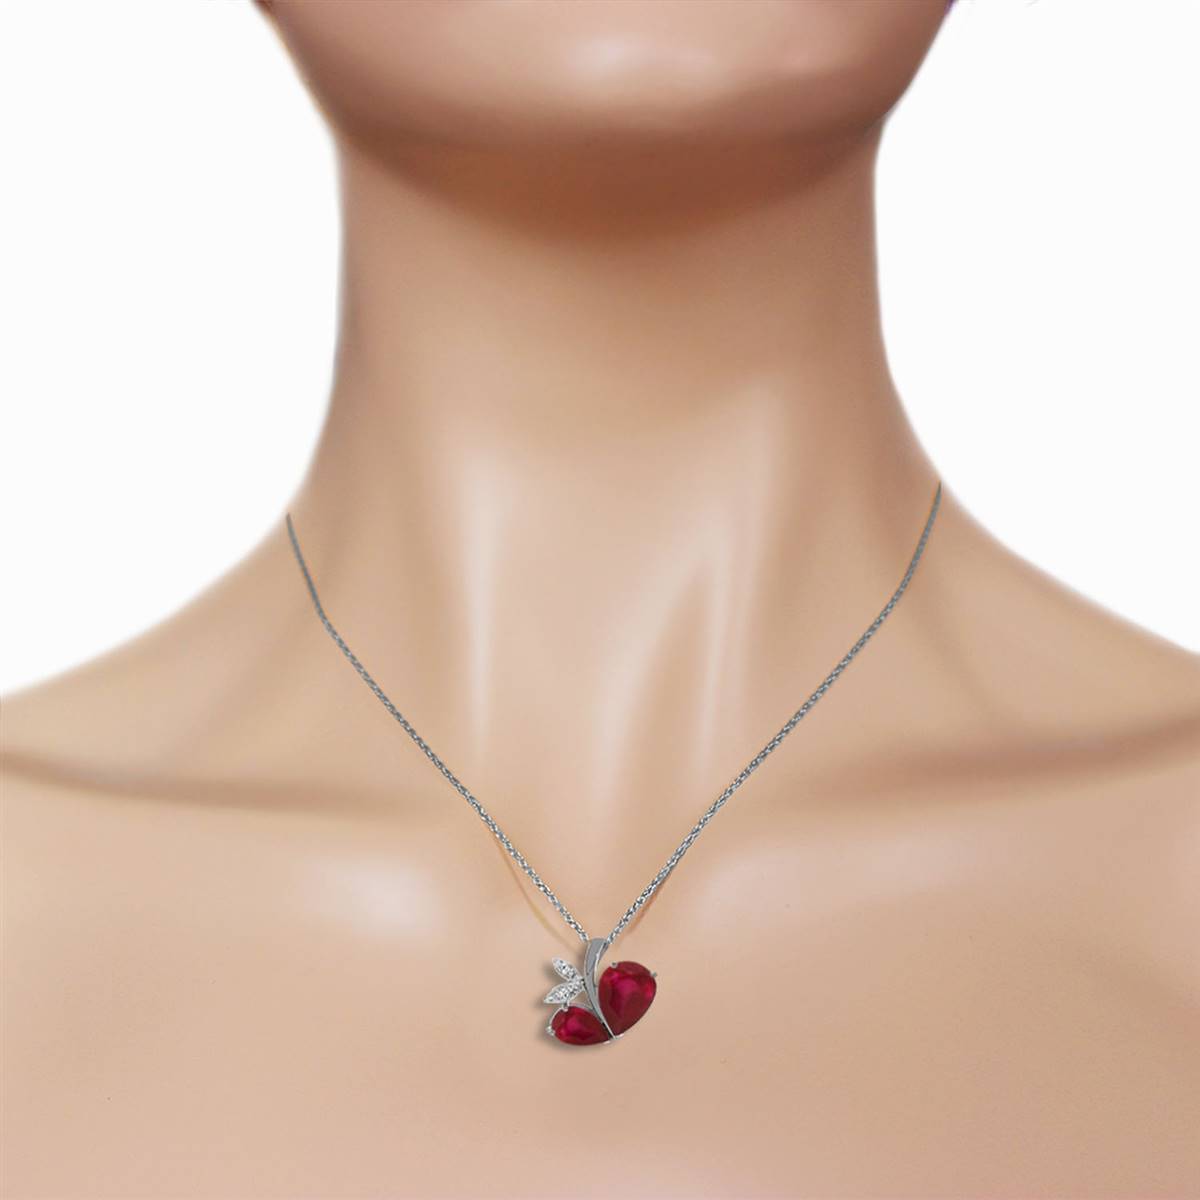 14K Solid White Gold Modern Heart Necklace w/ Natural Diamond & Rubies